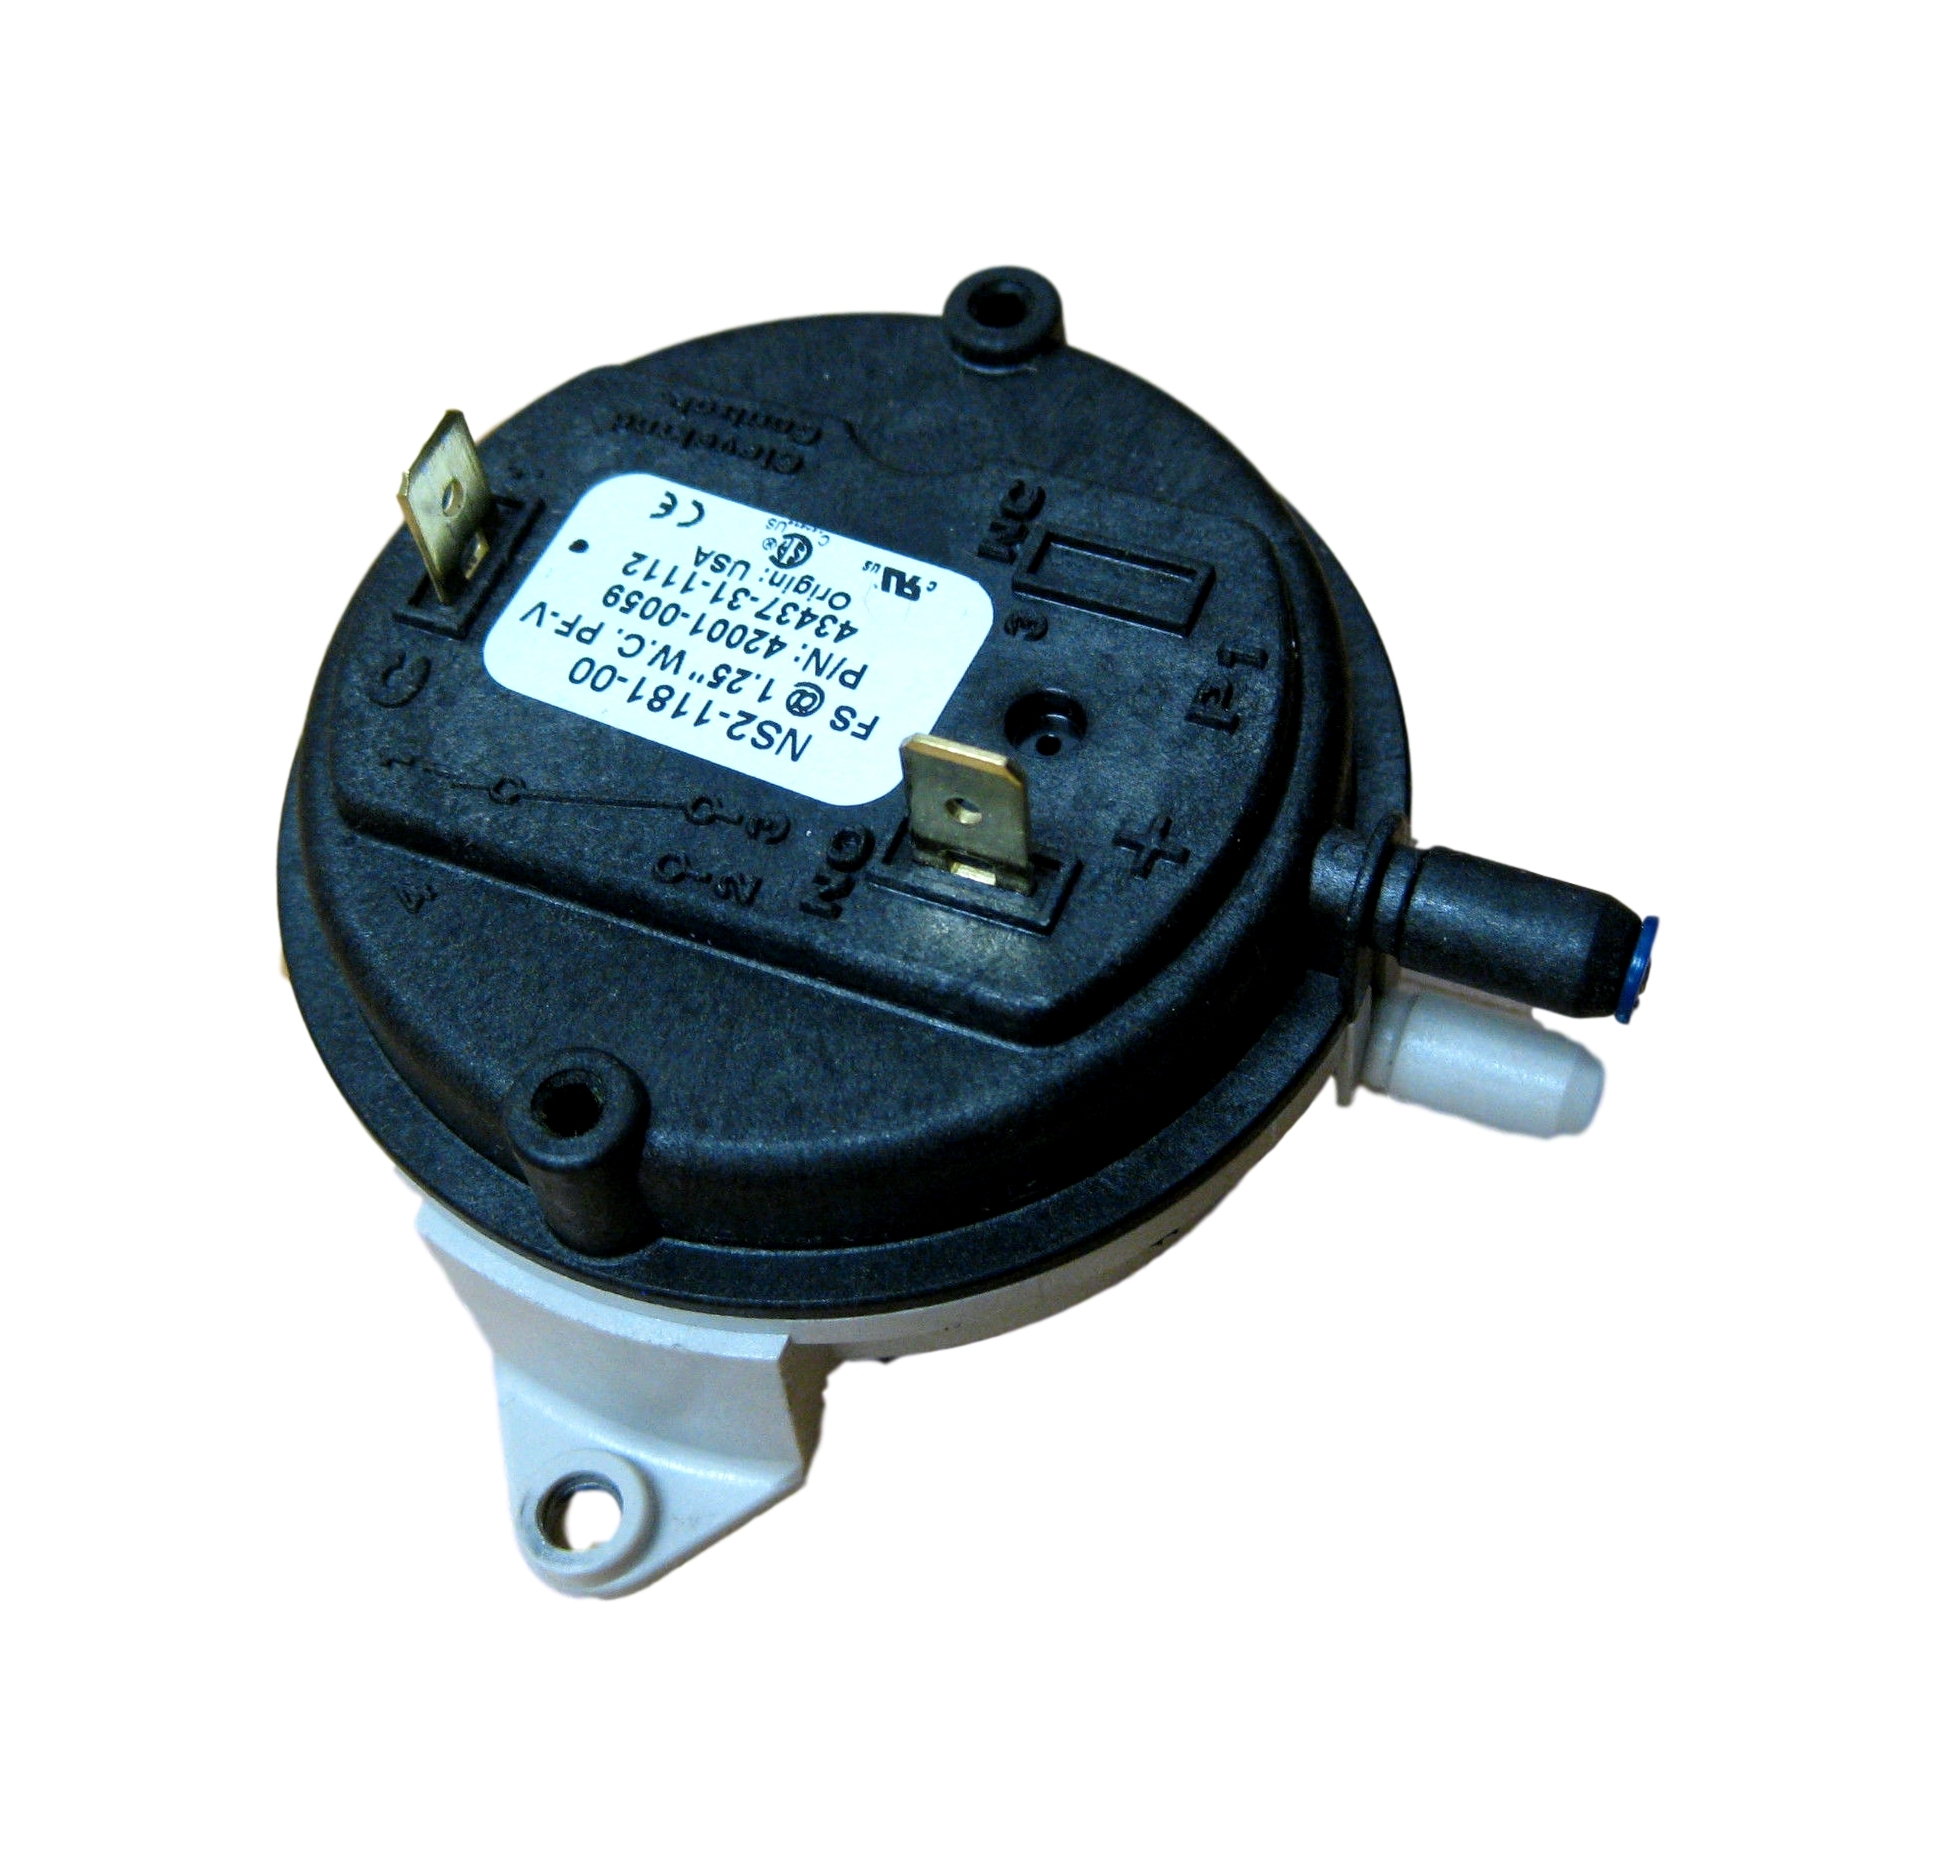 Pentair 42001-0059 Air Flow Switch - image 1 of 4